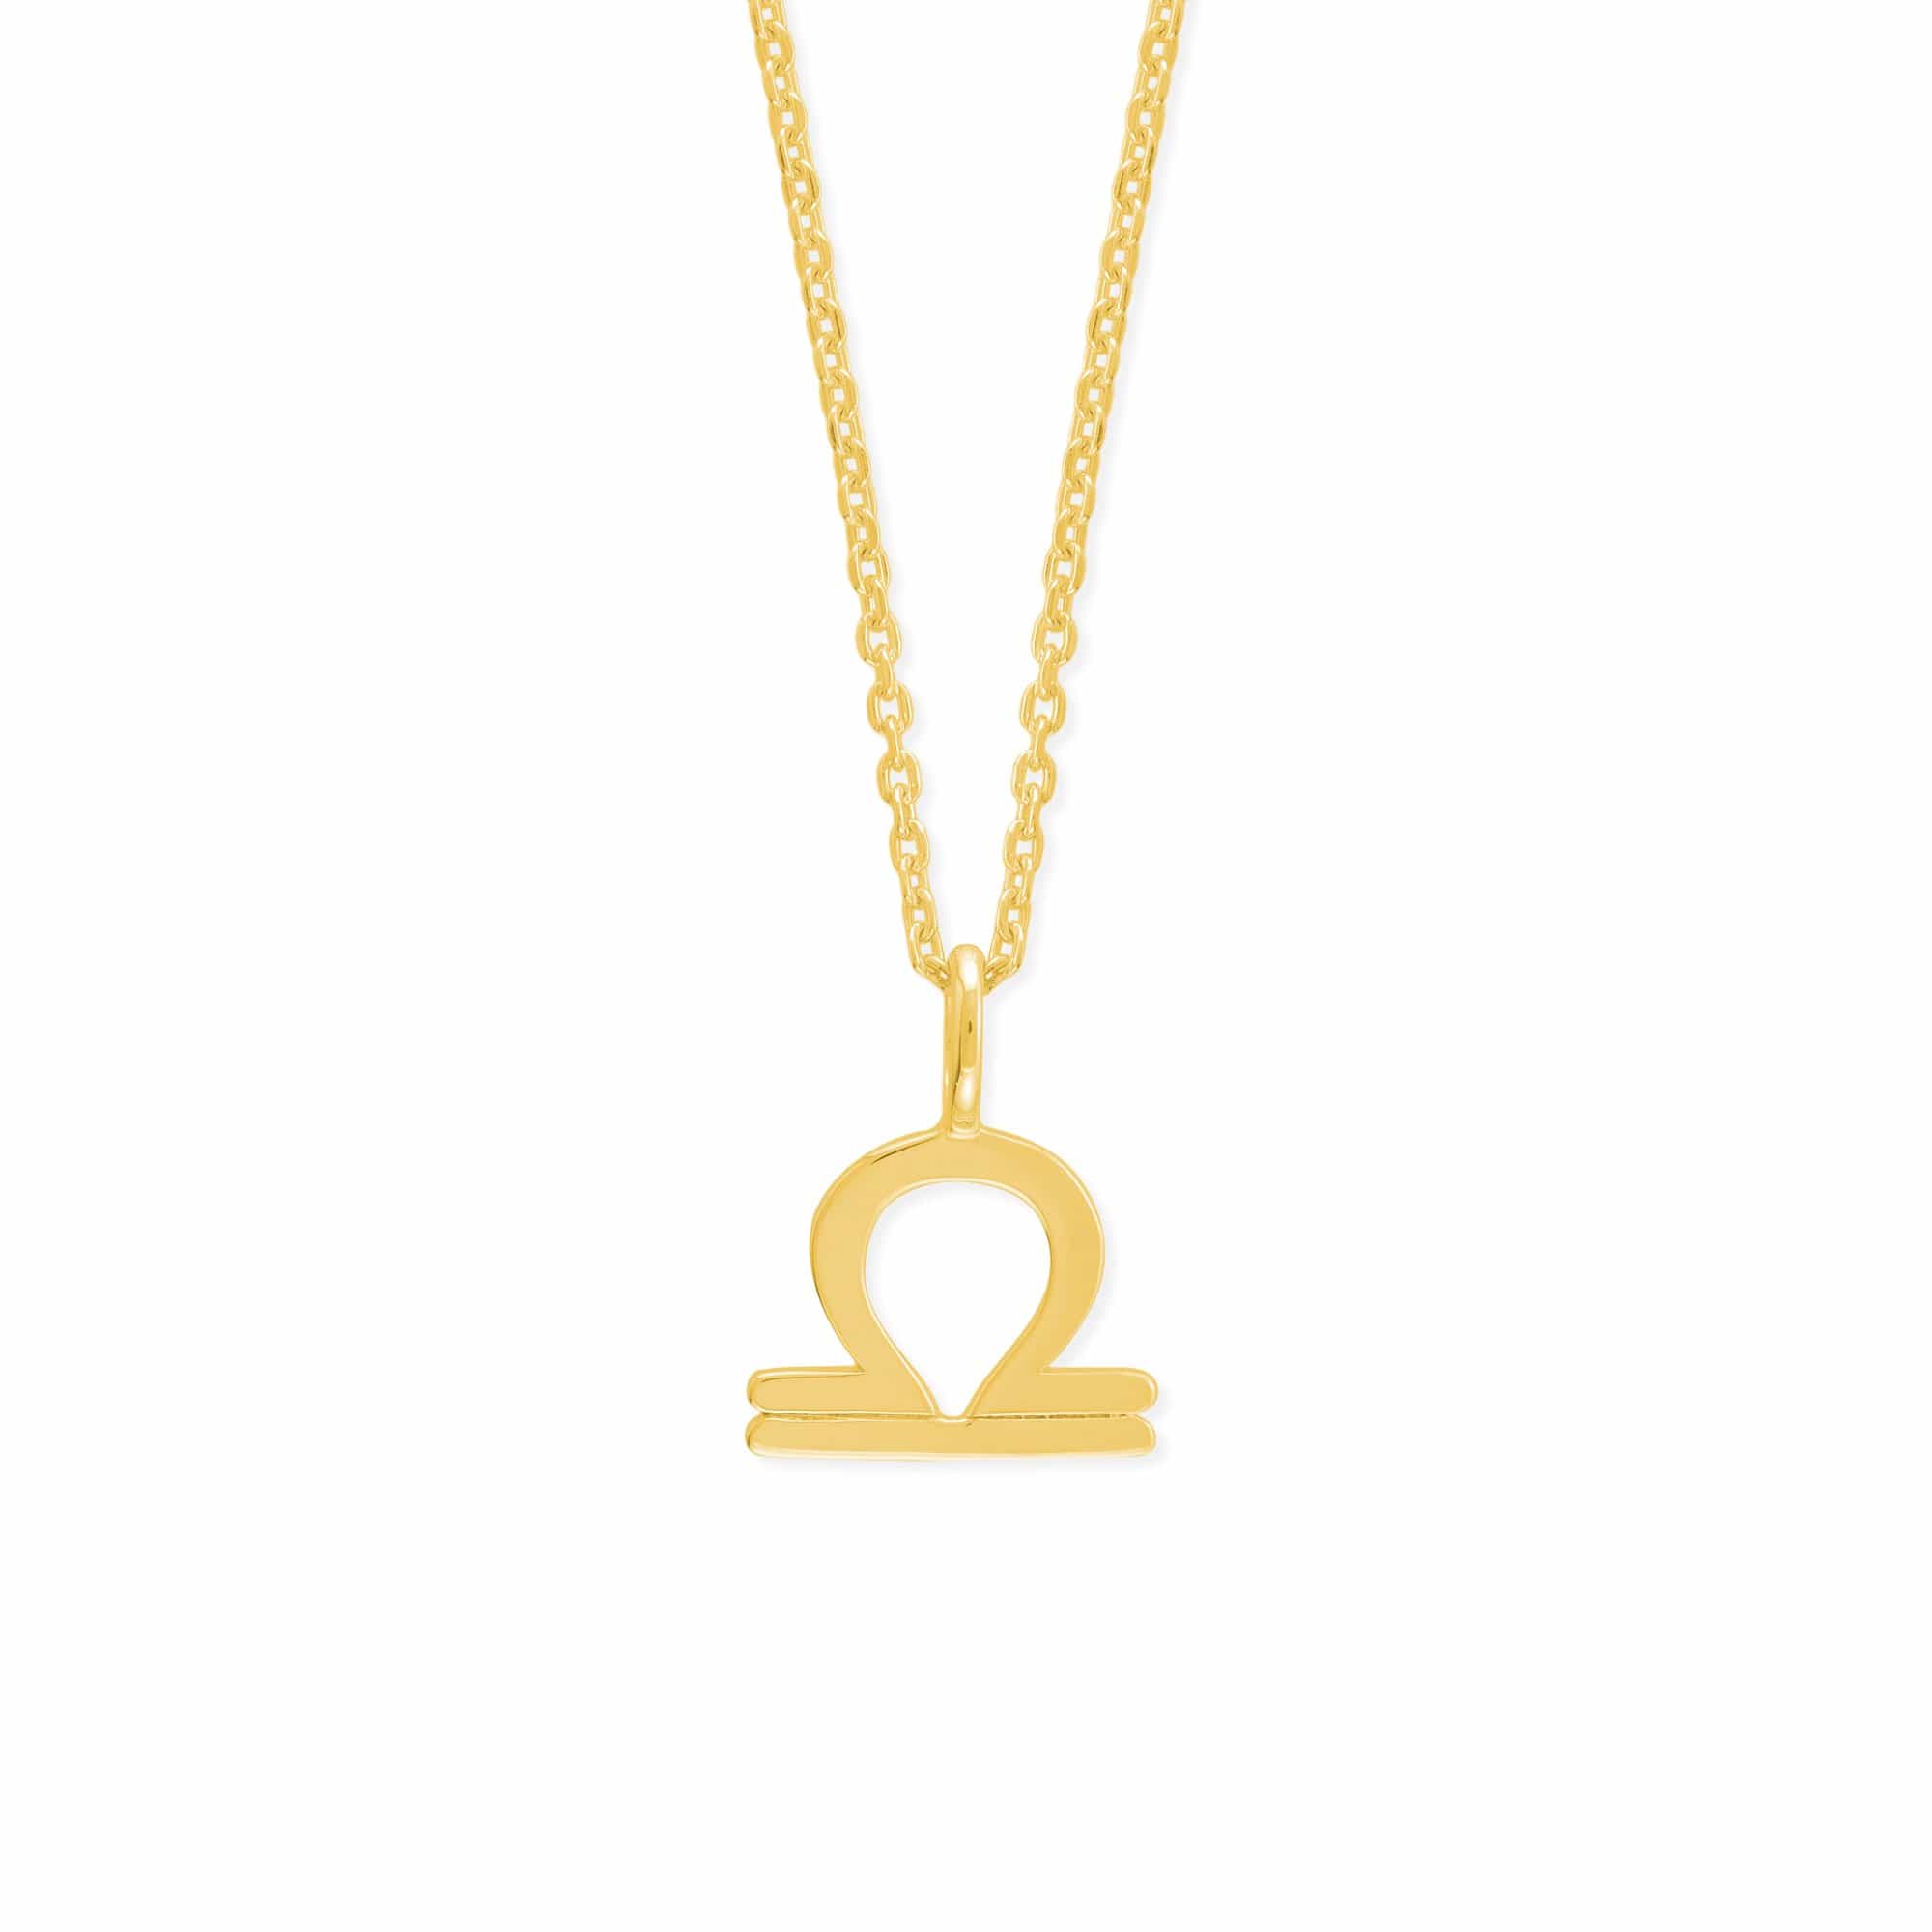 Boma Jewelry Necklaces 14K Gold Plated / Libra Zodiac Necklace